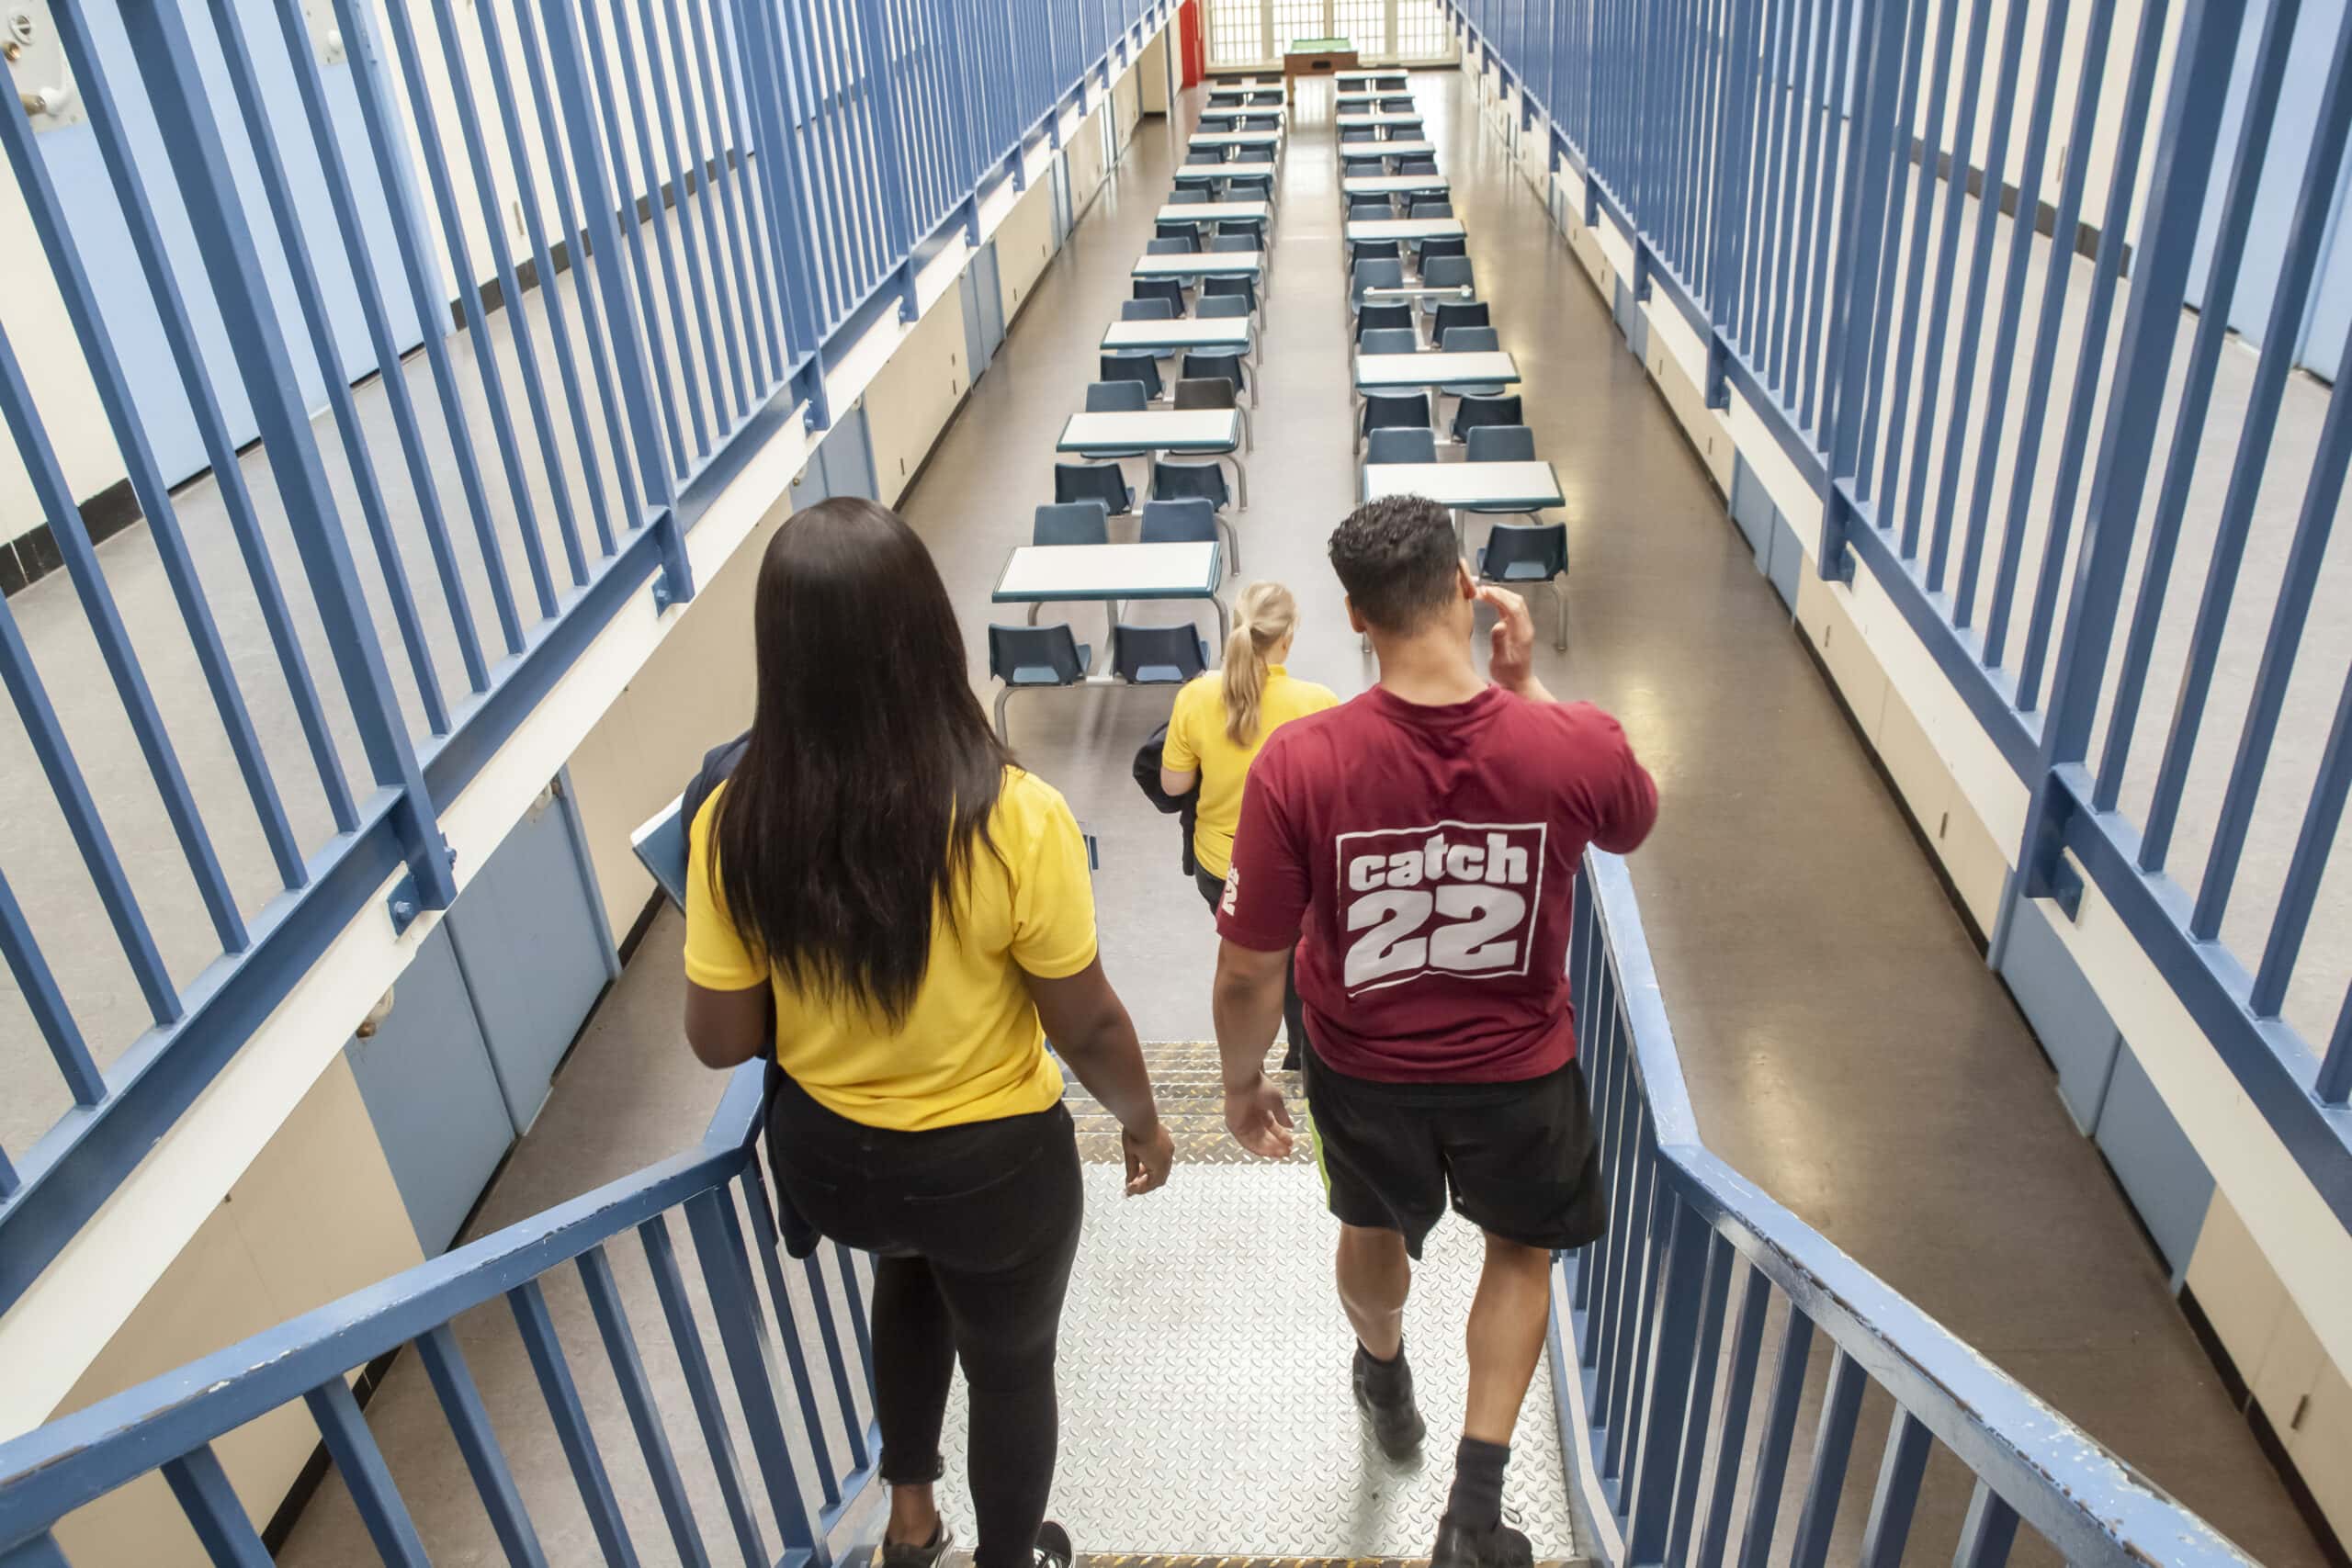 A man and two women walk down the stairs at HMP Thameside wearing Catch22 uniform. At the bottom of the stairs, there are rows of tables and chairs.